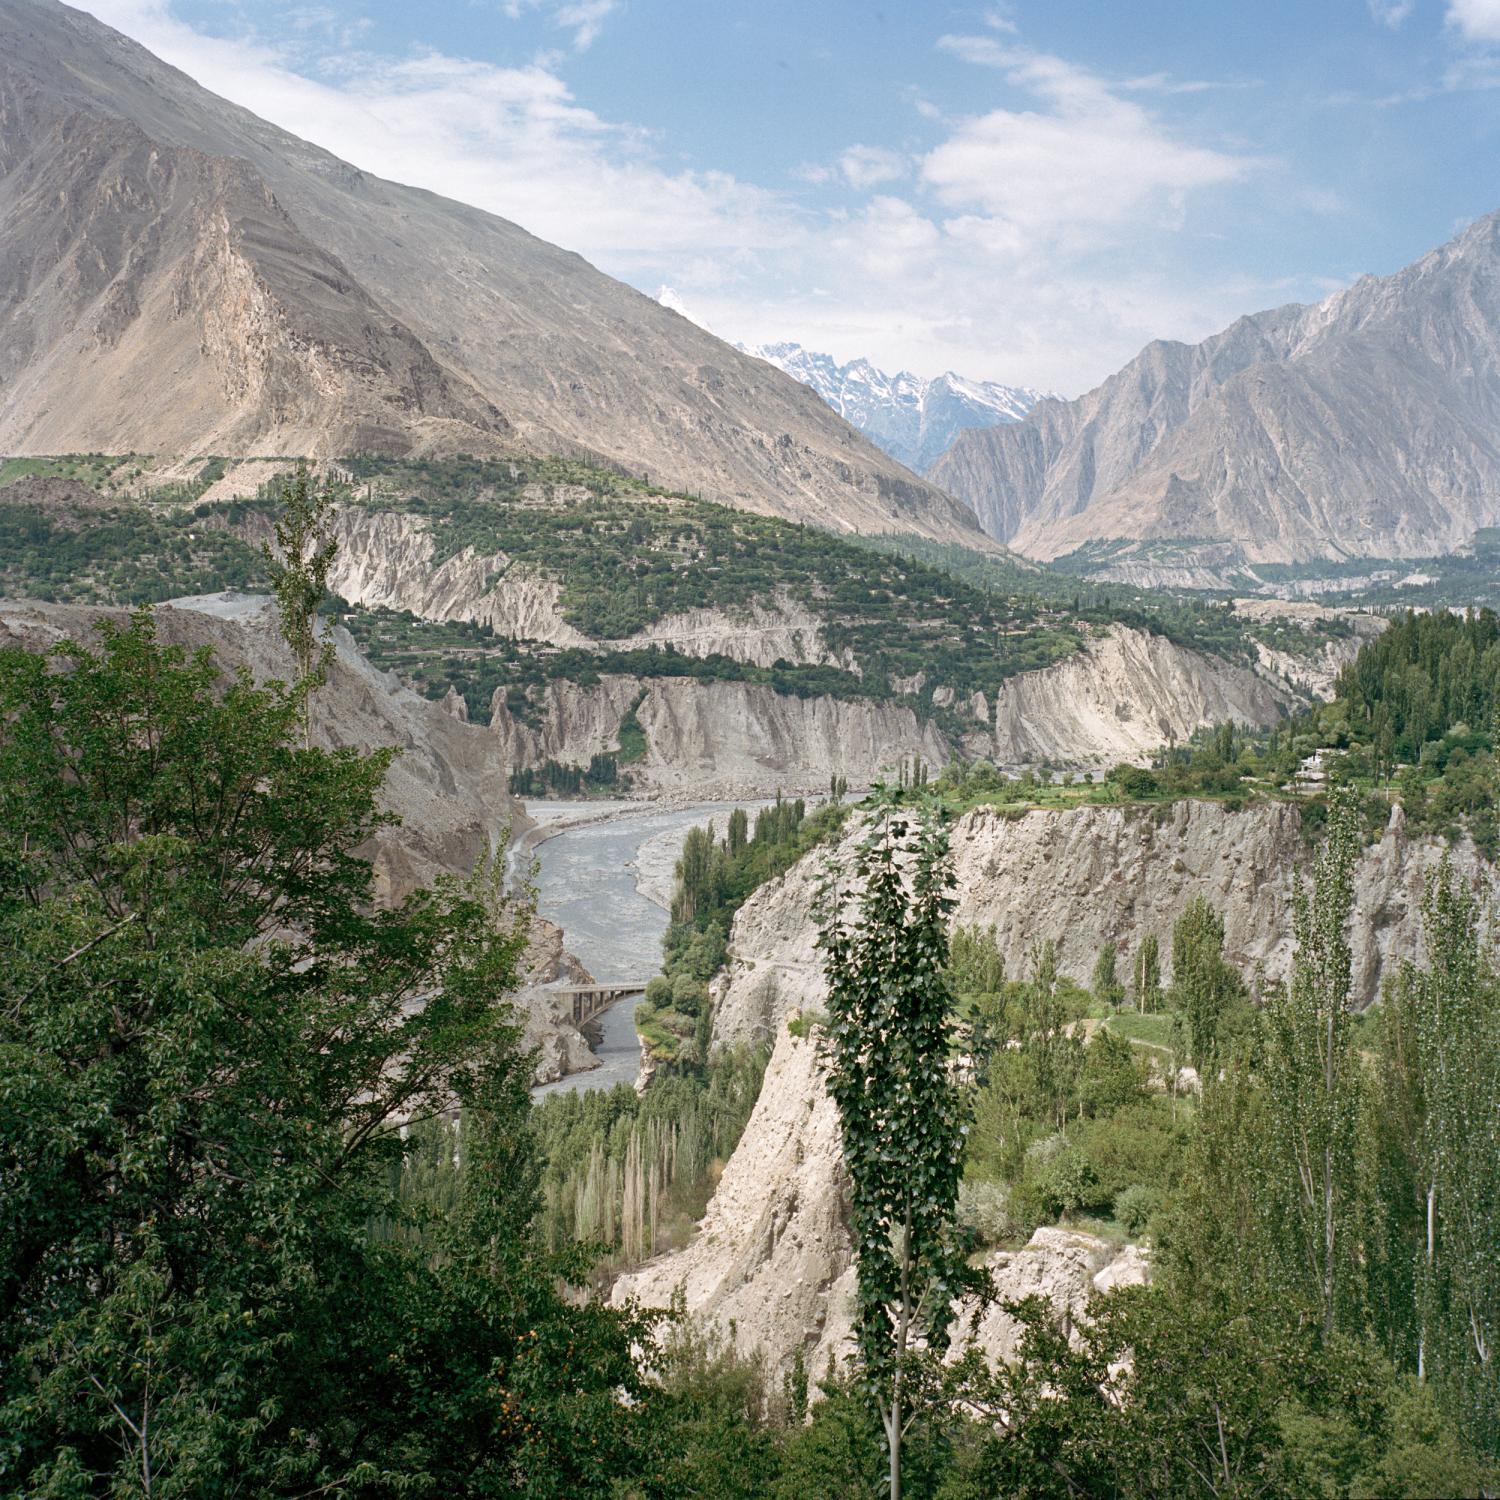 Single images - A view of the majestic Hunza valley in northern Pakistan,...